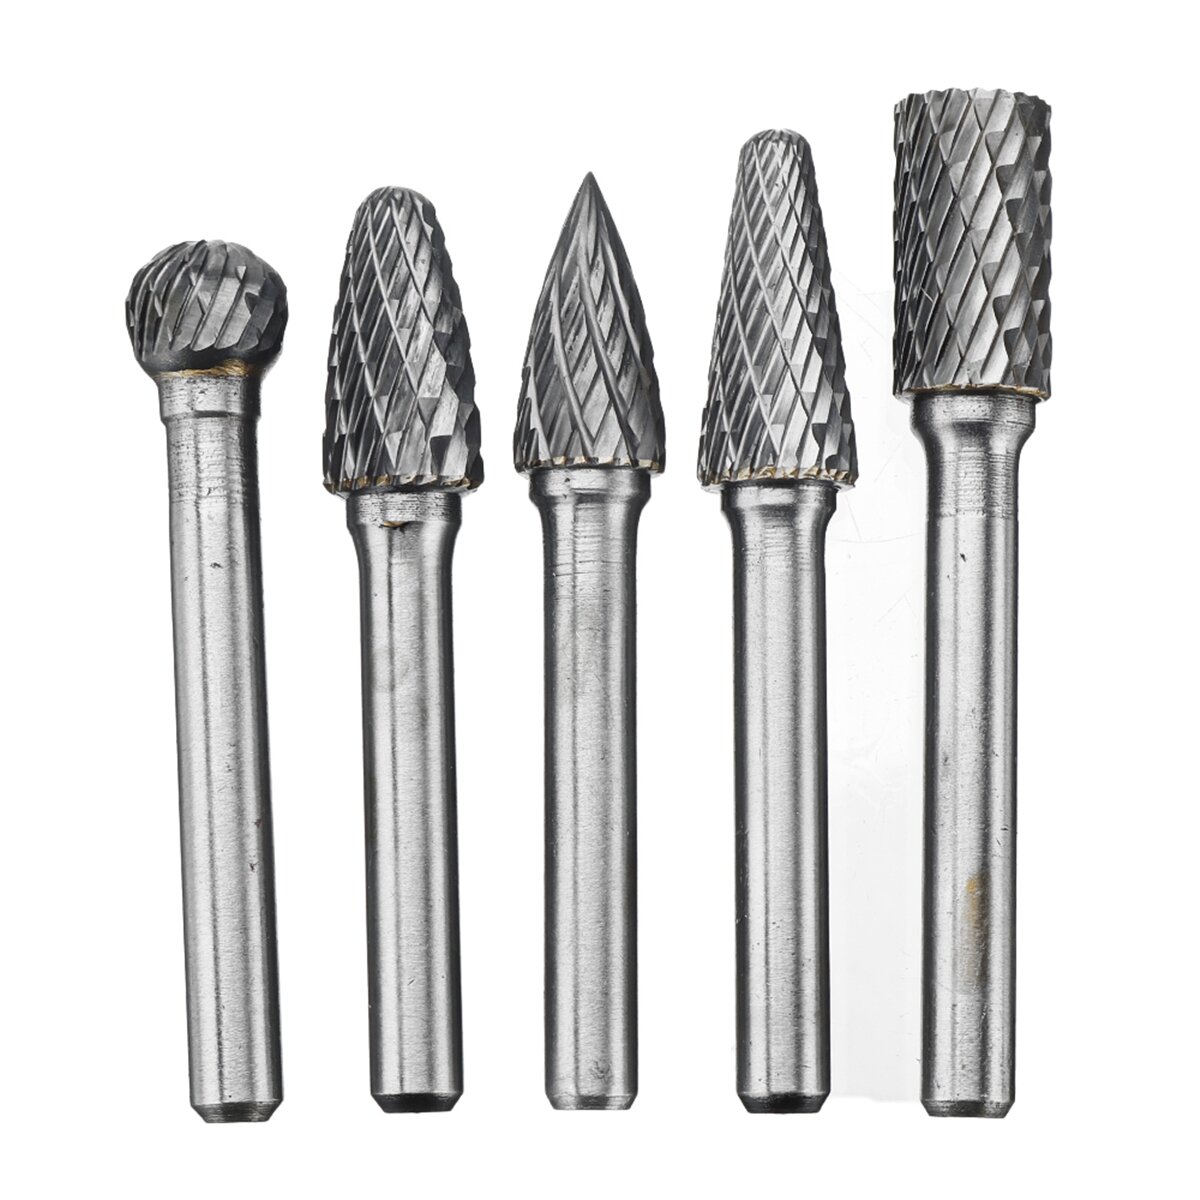 best price,drillpro,rb29,5pcs,6mm,shank,tungsten,carbide,burr,rotary,cutter,discount